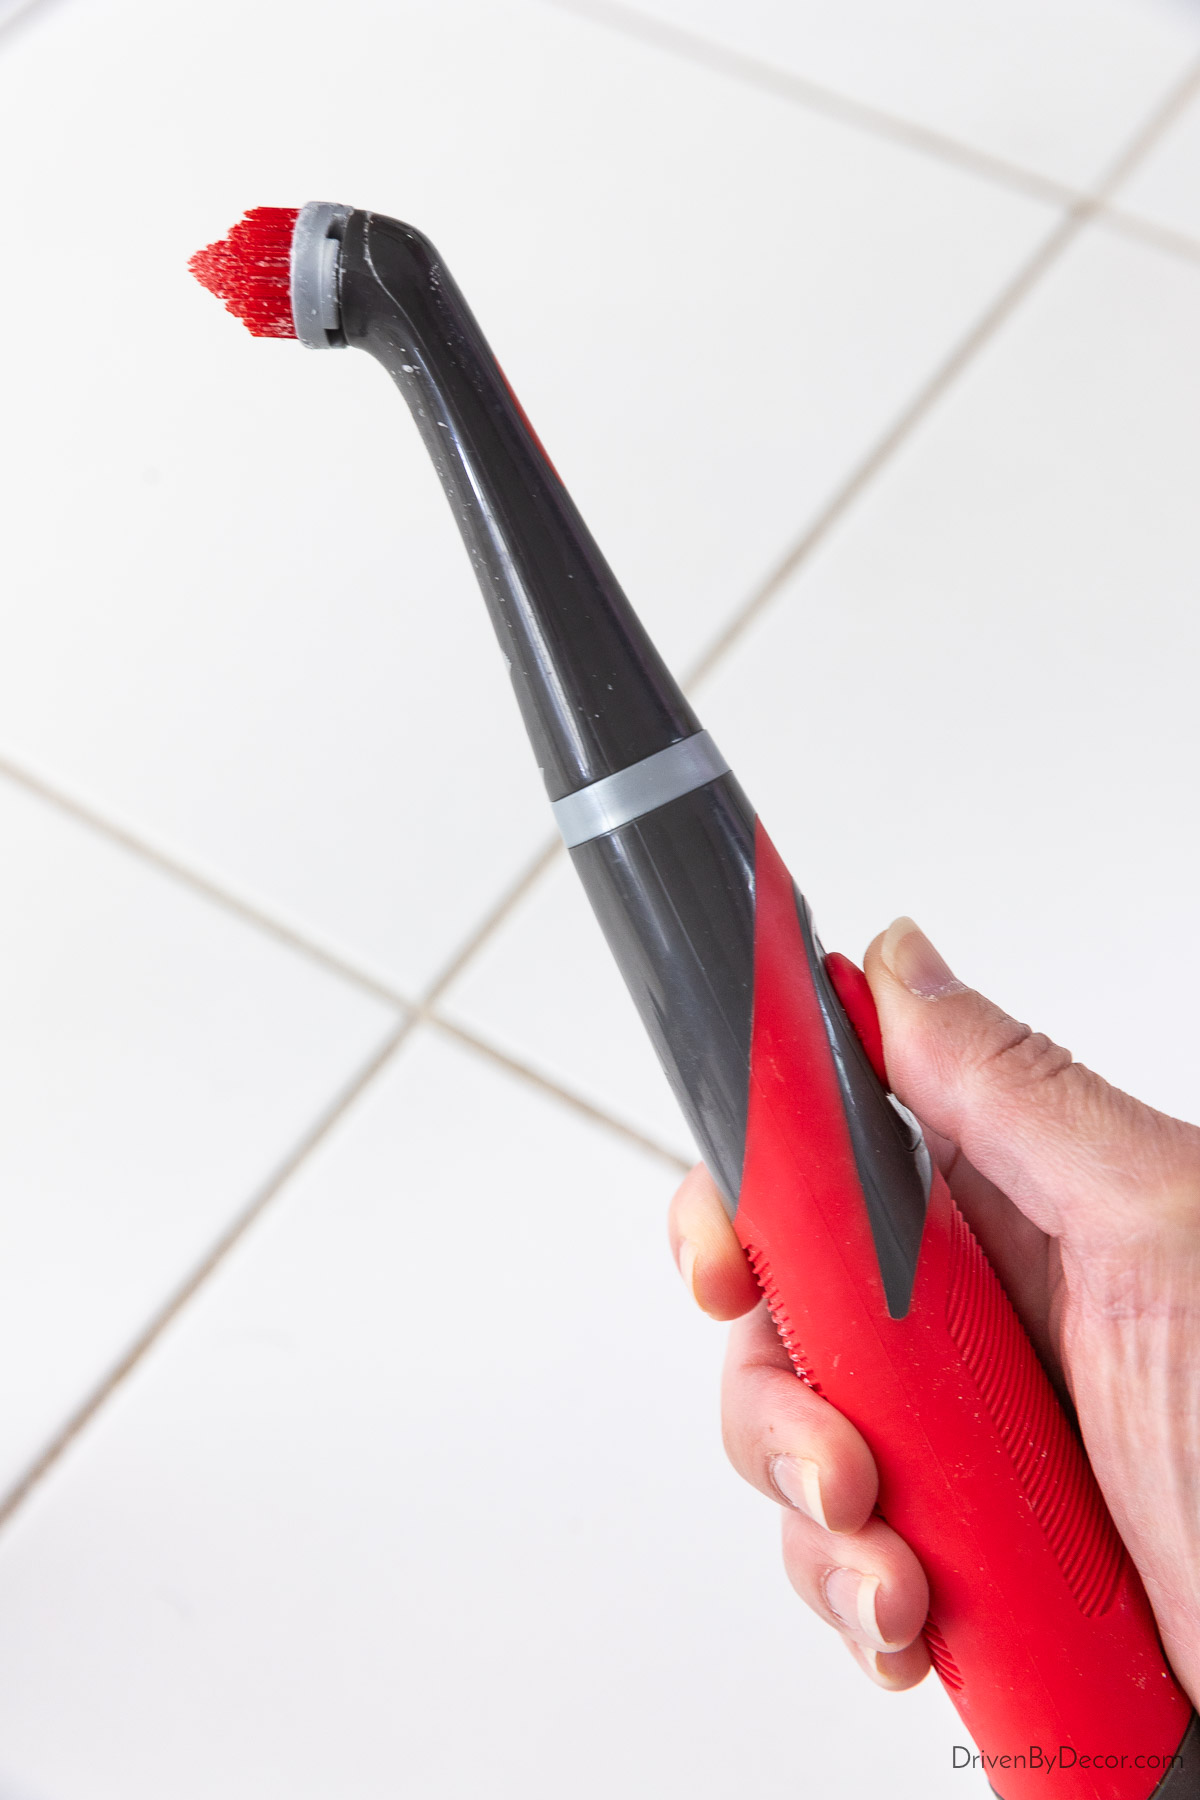 The grout cleaning spin brush that makes cleaning grout a breeze!